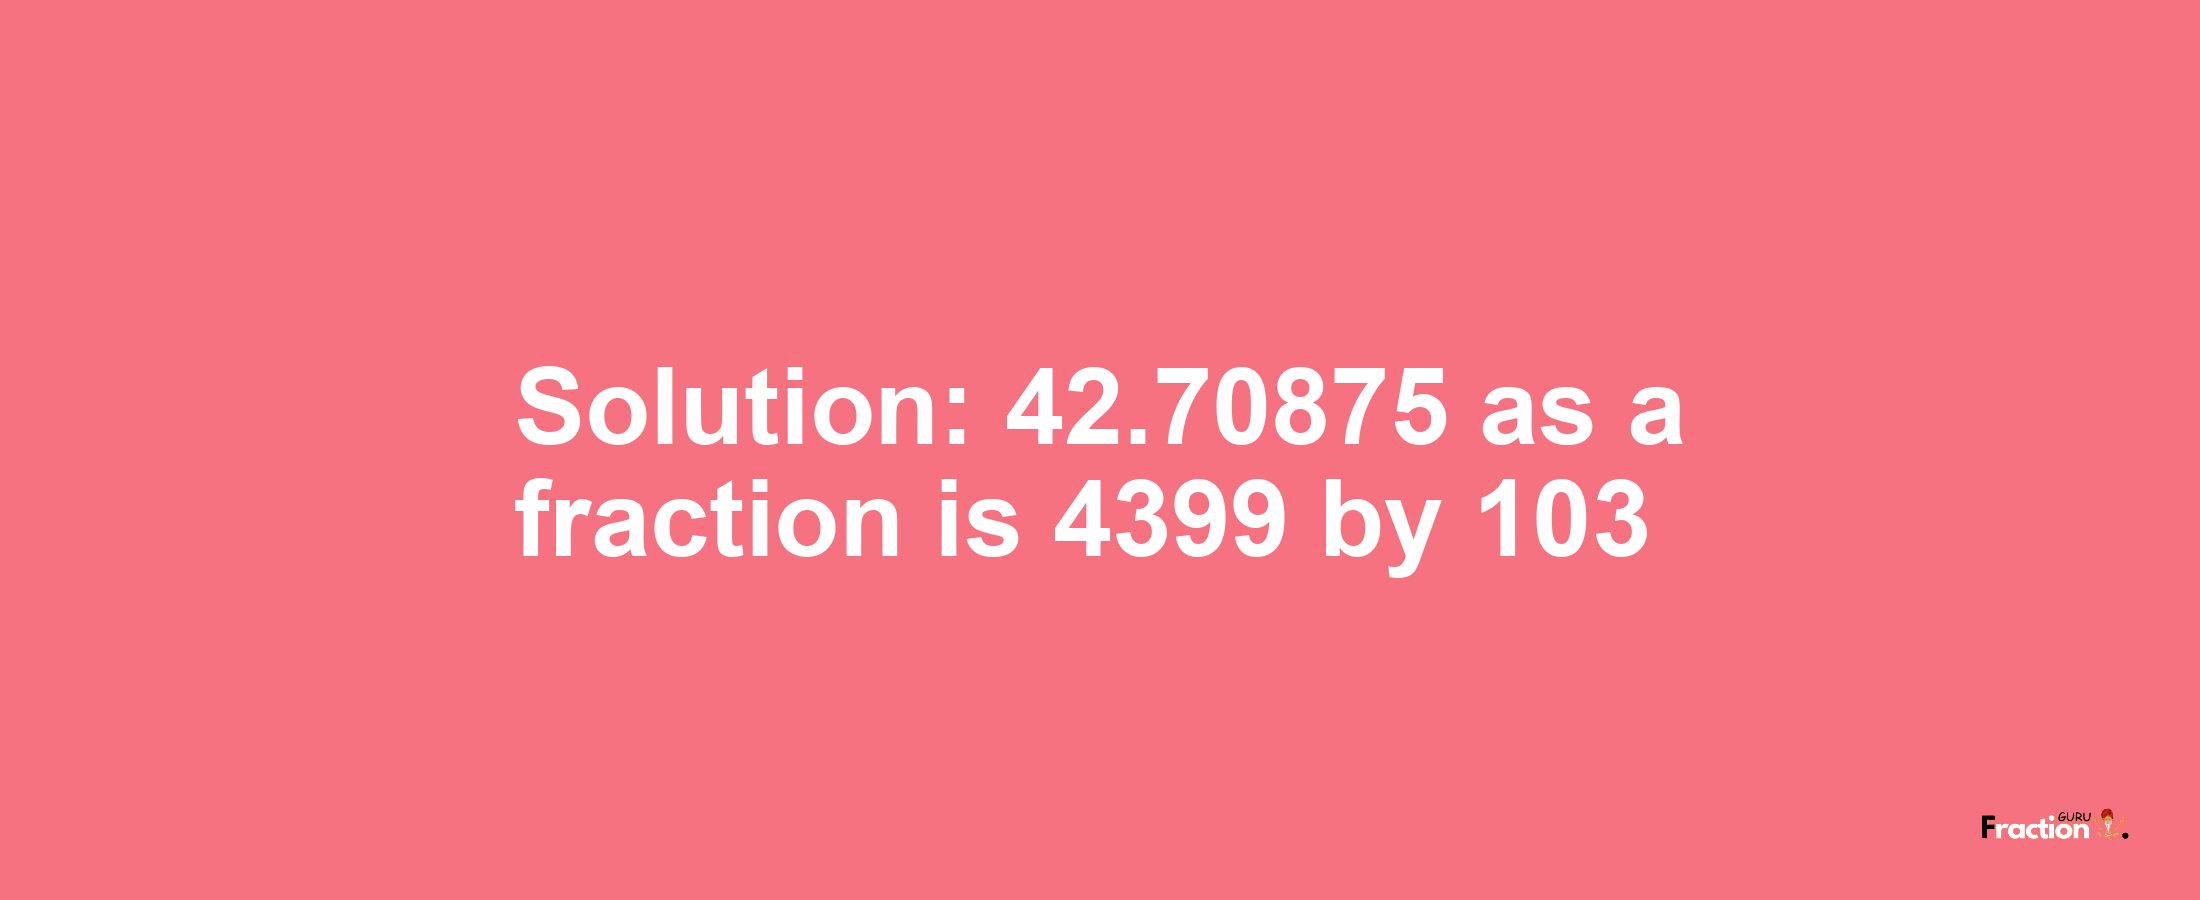 Solution:42.70875 as a fraction is 4399/103